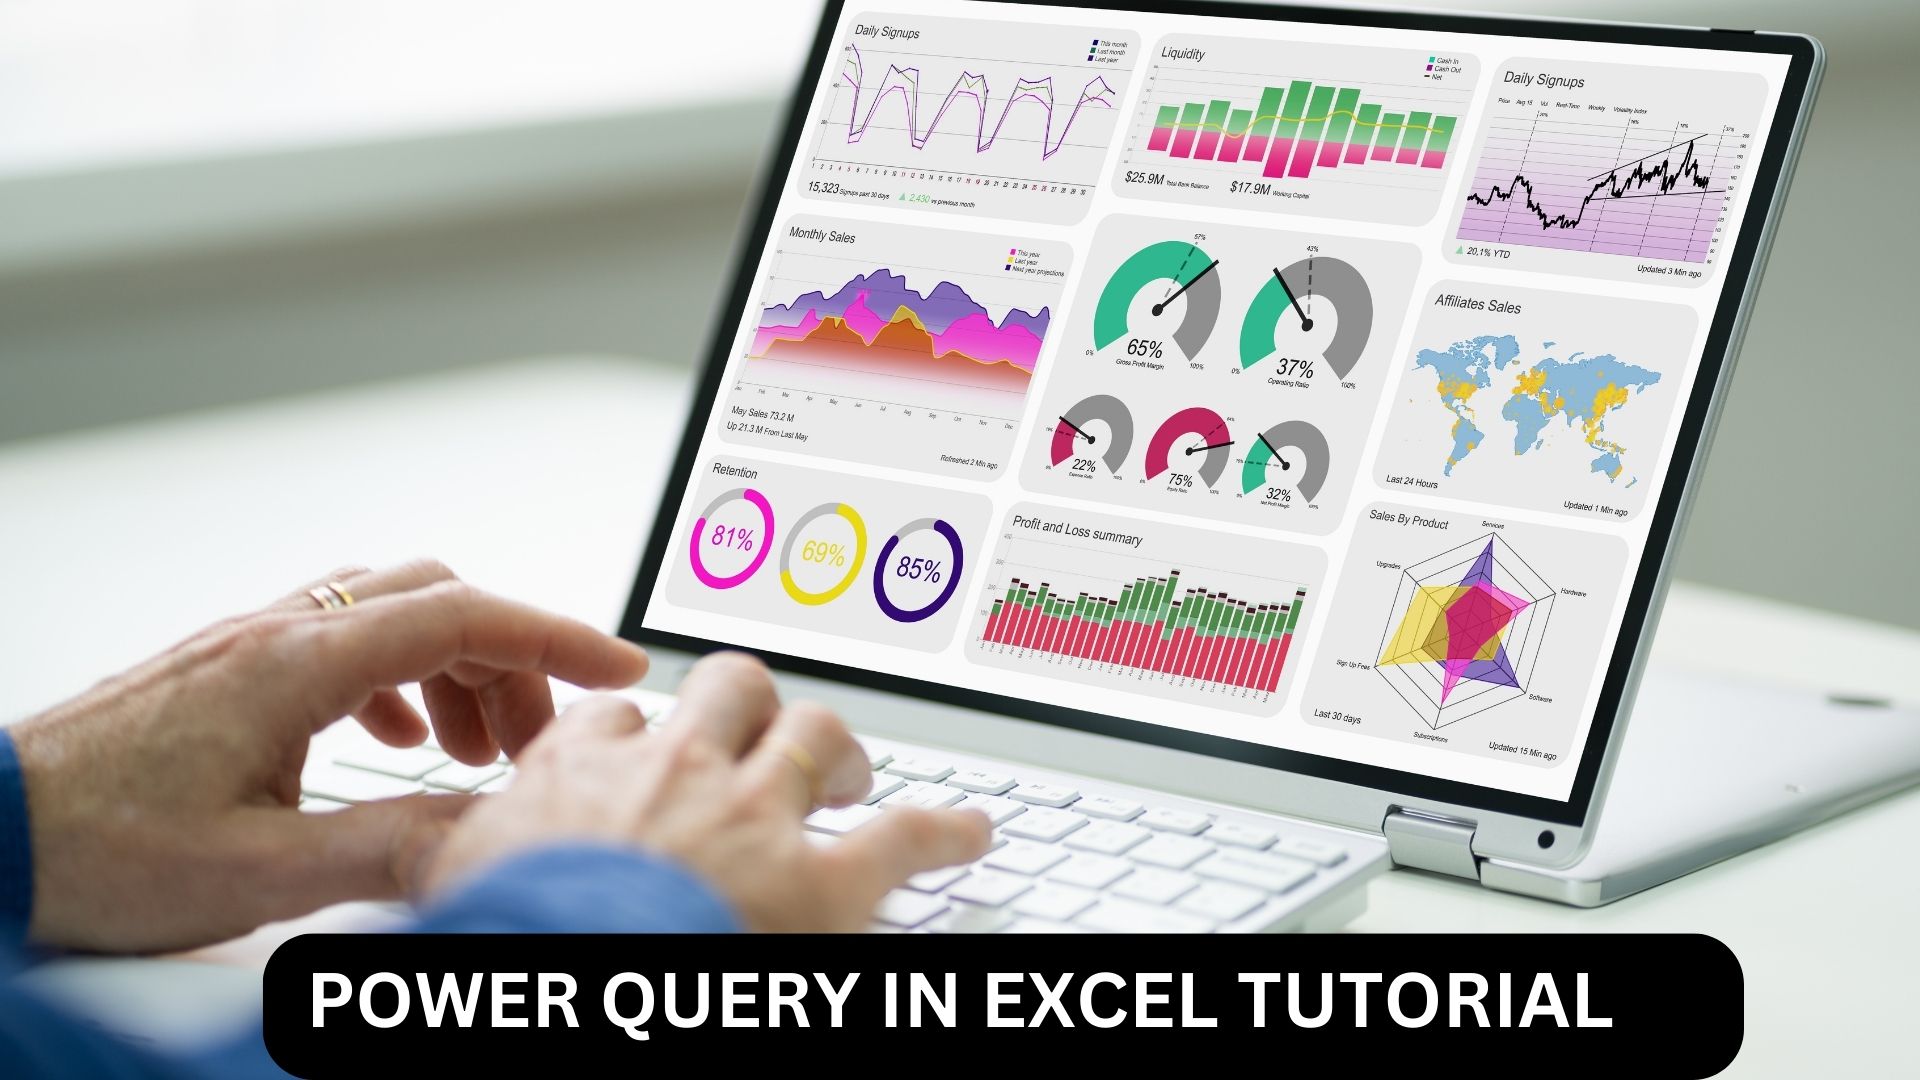 POWER QUERY IN EXCEL TUTORIAL